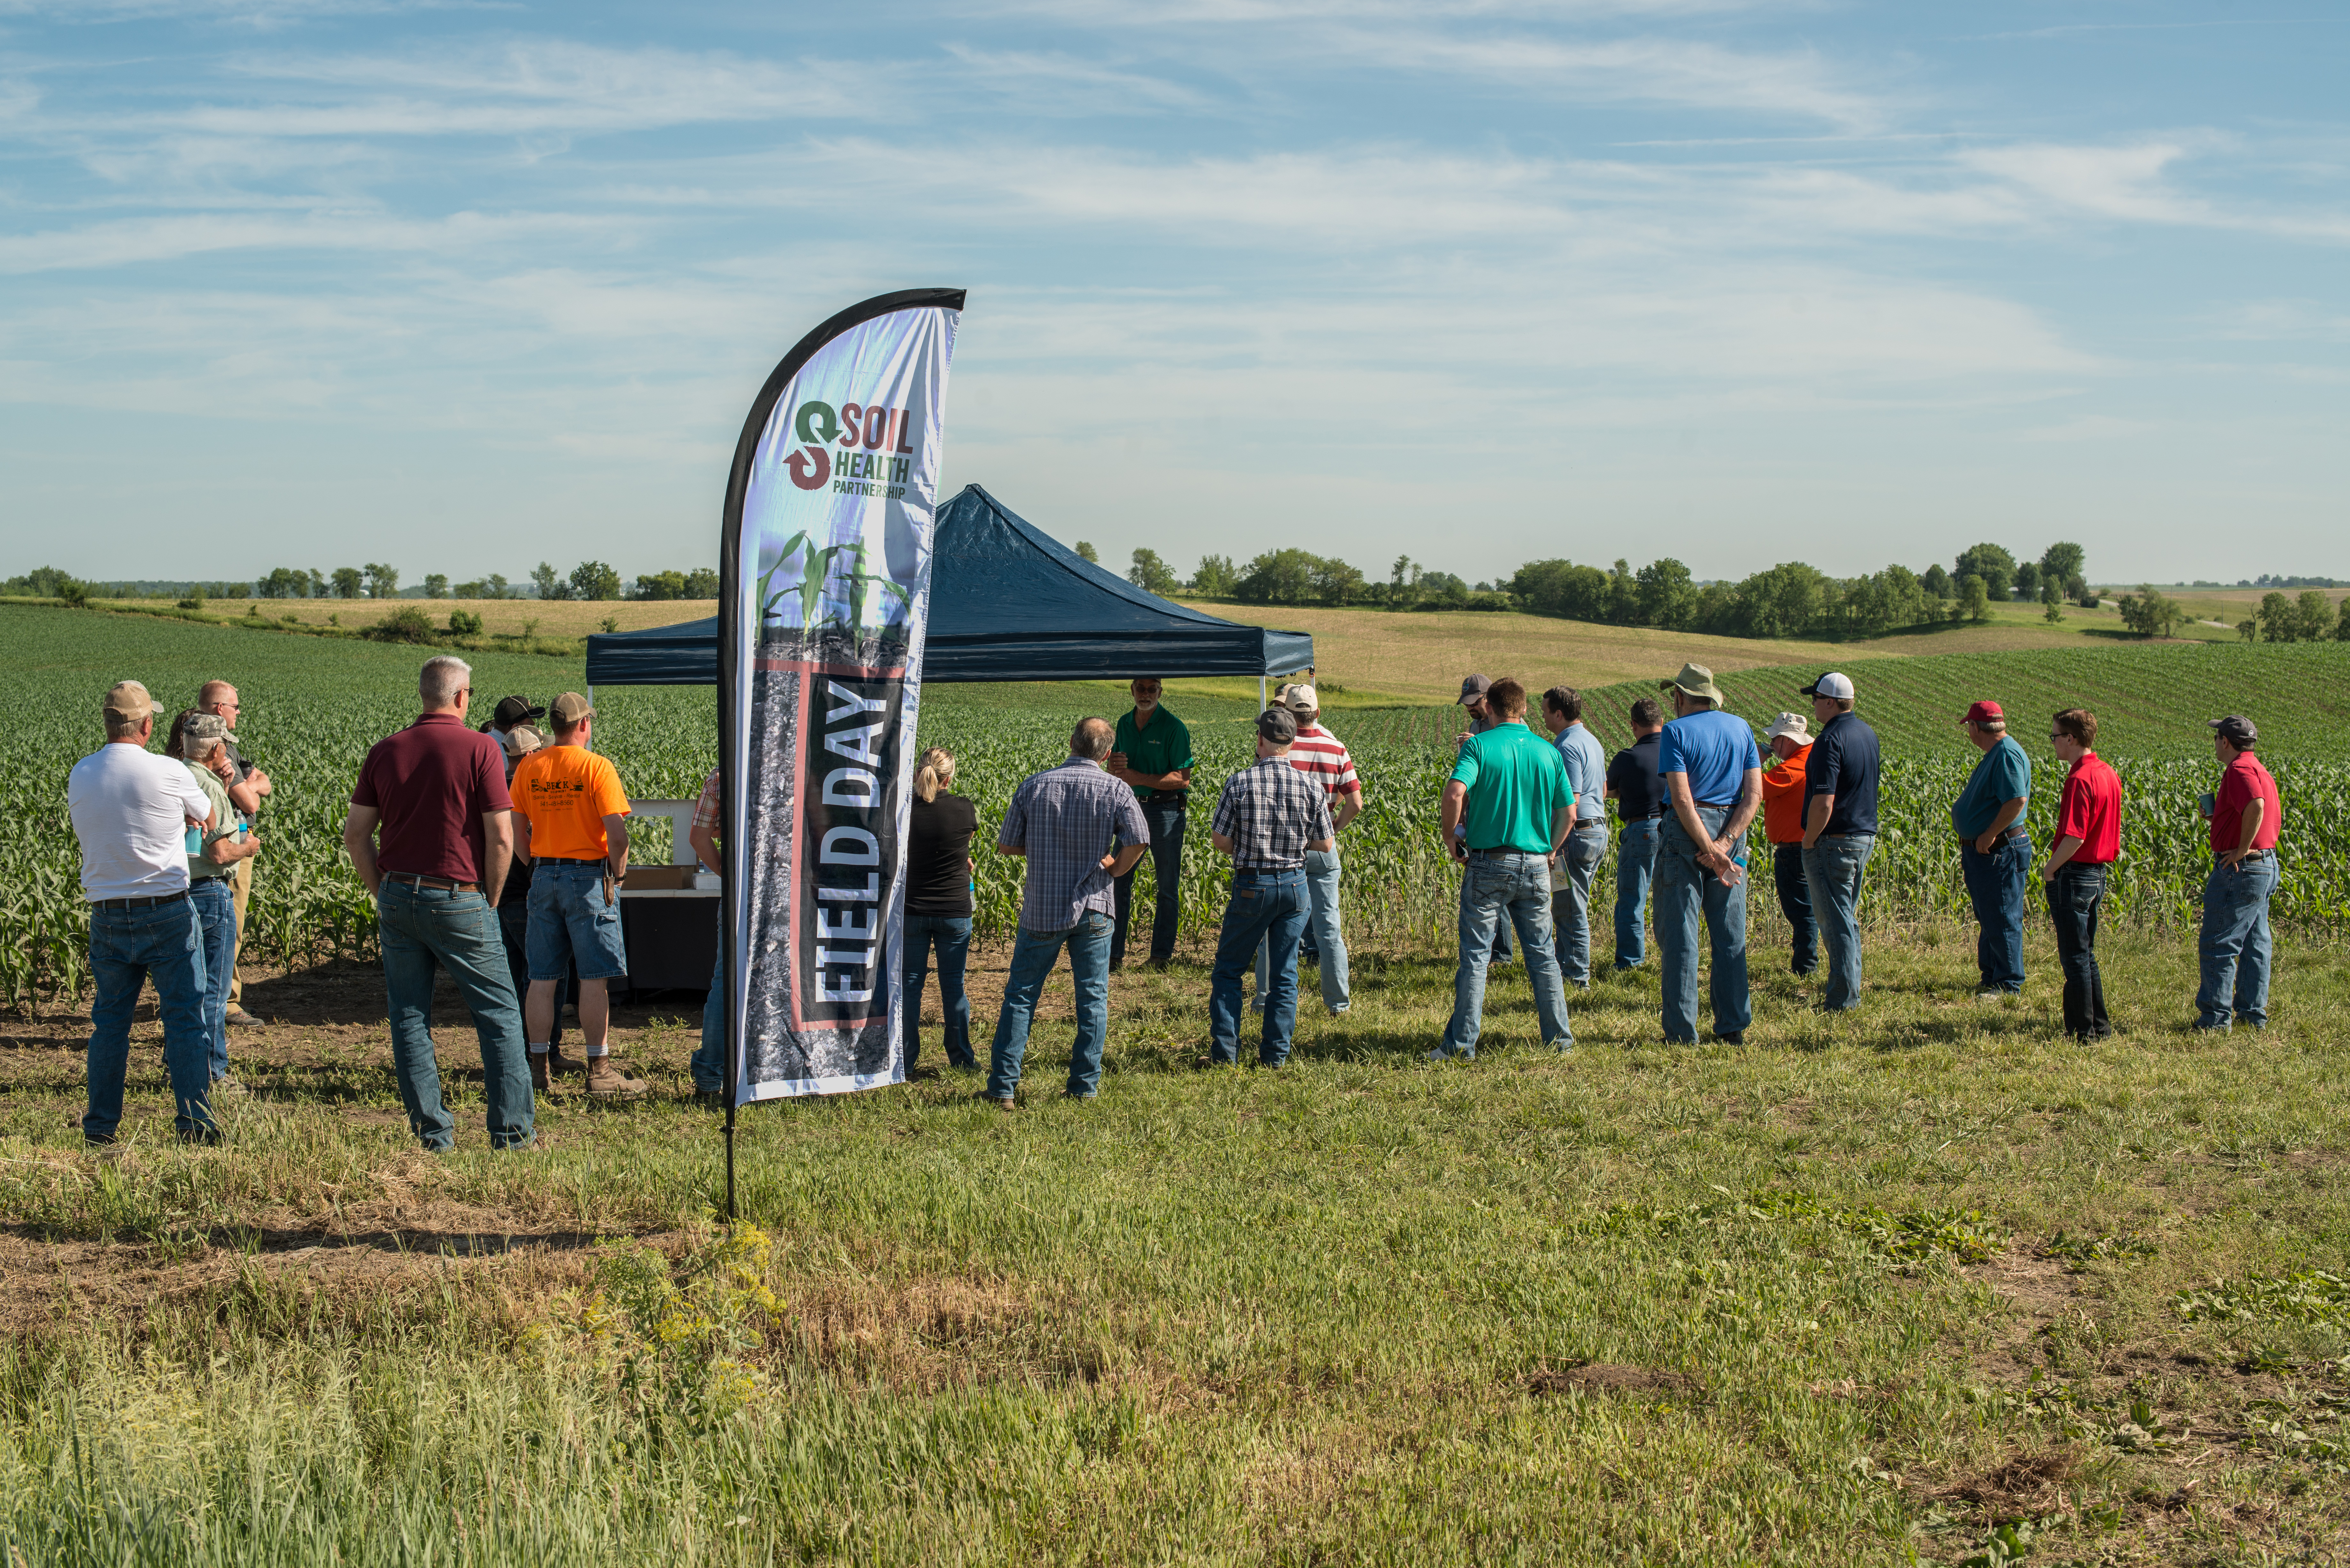 At the field days, Midwestern farmers can learn how changing nutrient management and tillage strategies, along with cover crop adoption, can make farmland more productive, efficient and sustainable.